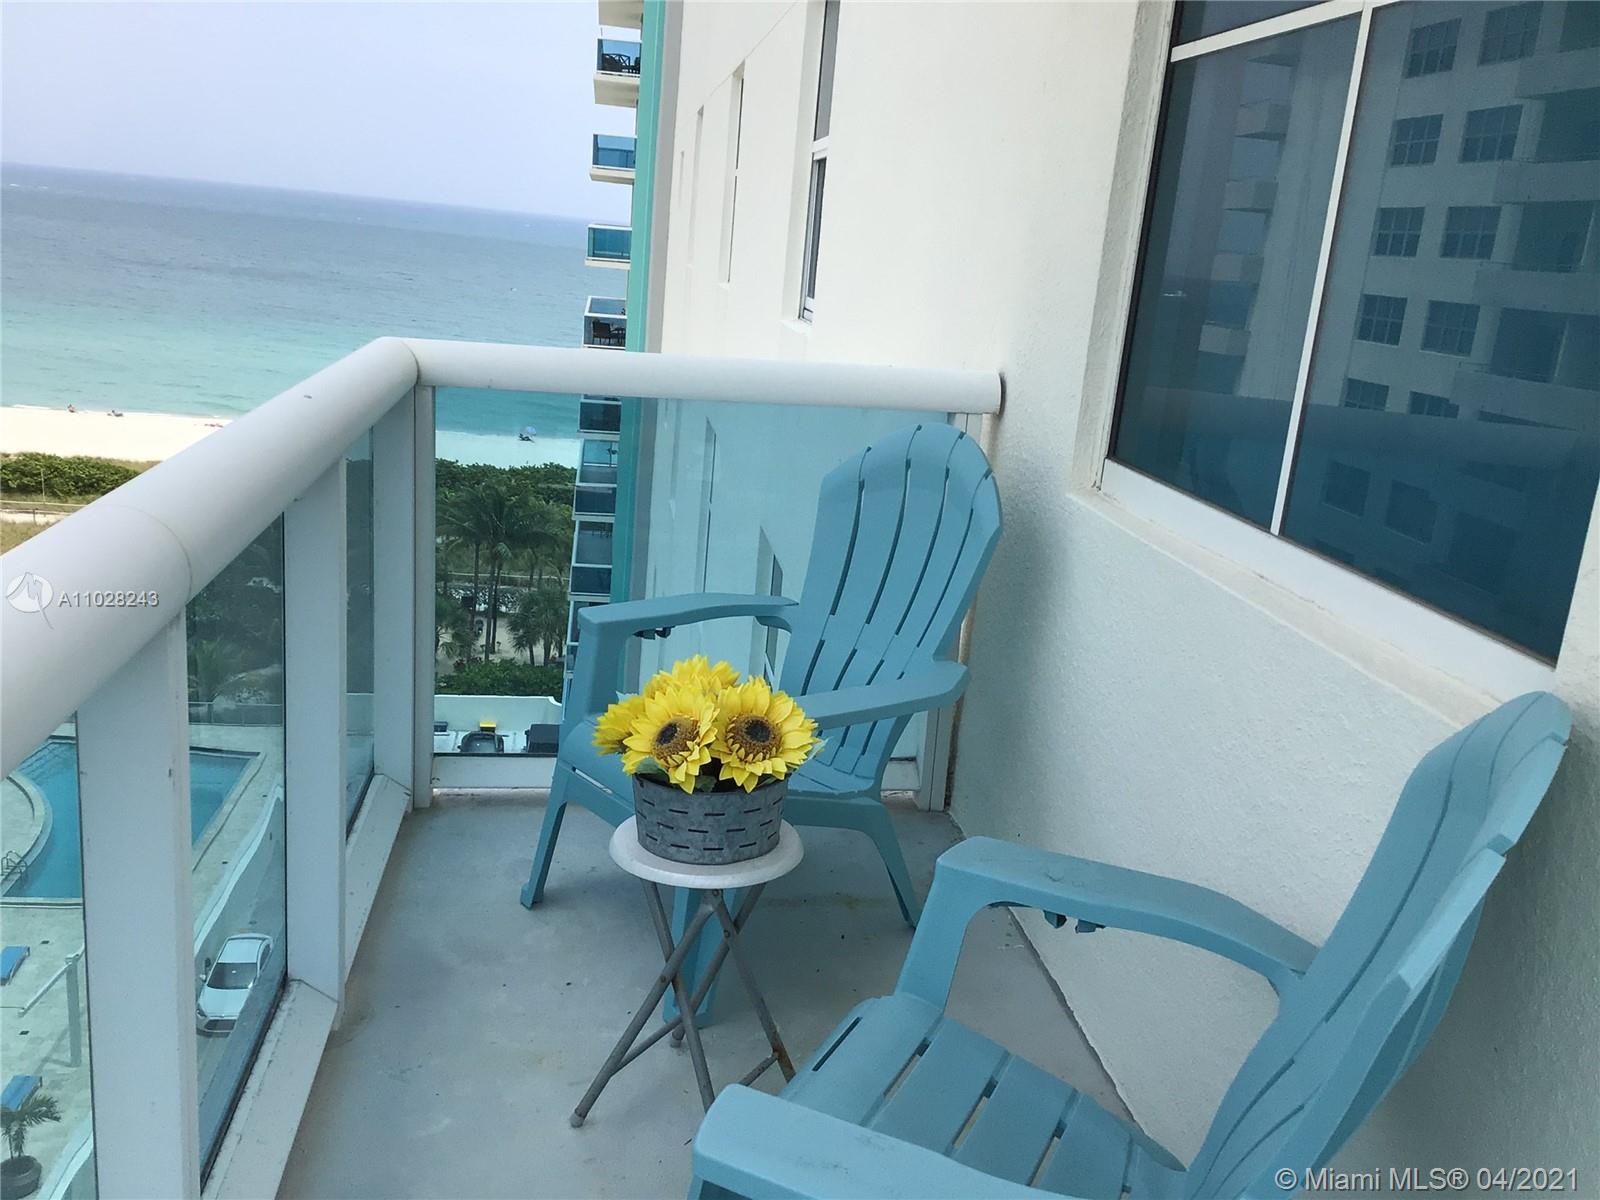 9201 Collins Ave 921, Surfside, Florida 33154, 2 Bedrooms Bedrooms, ,2 BathroomsBathrooms,Residential,For Sale,9201 Collins Ave 921,A11028243